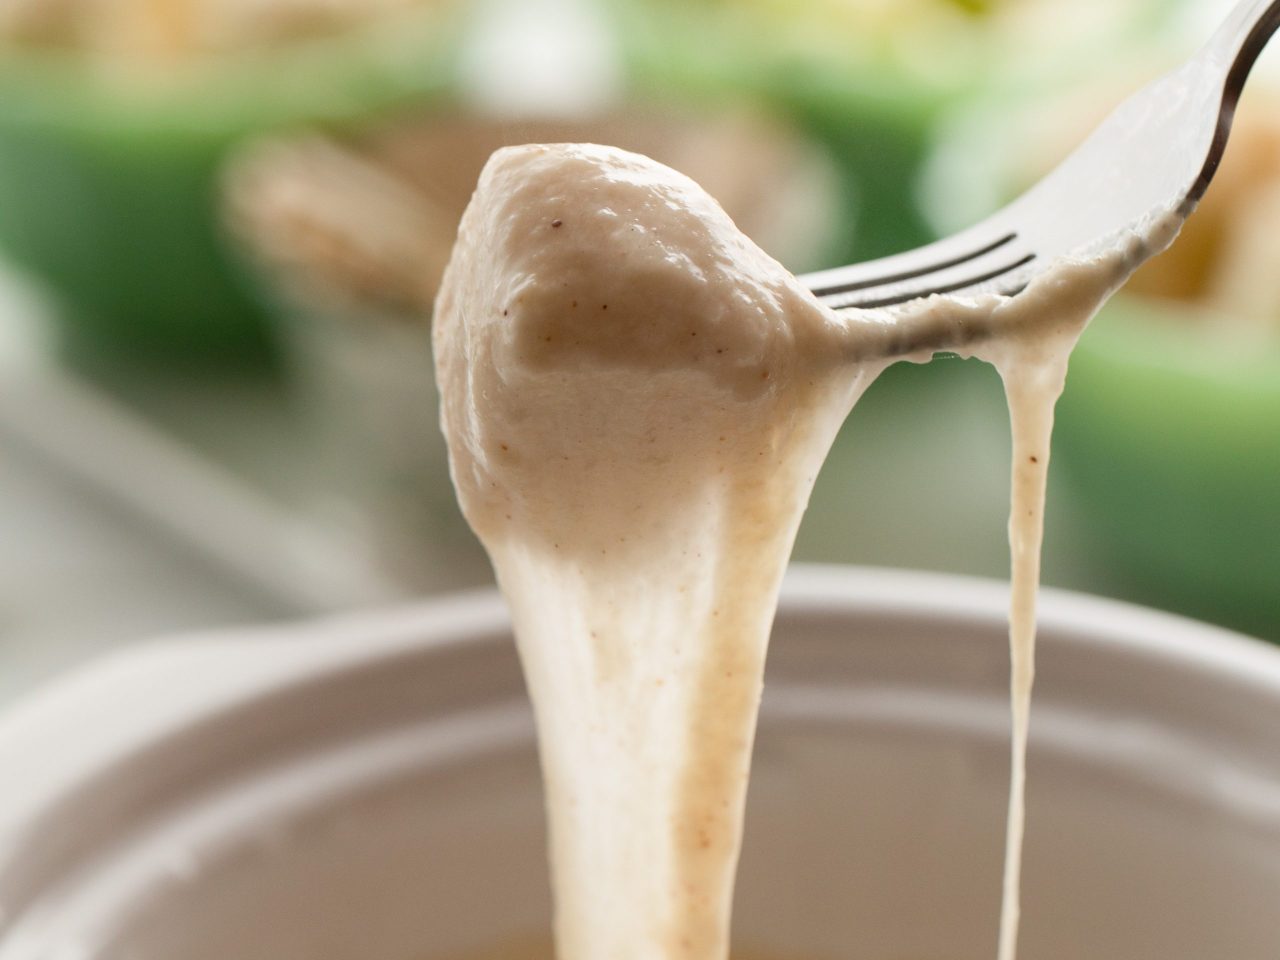 Ree Drummond's Slow-Cooker Fondue, as seen on The Pioneer Woman